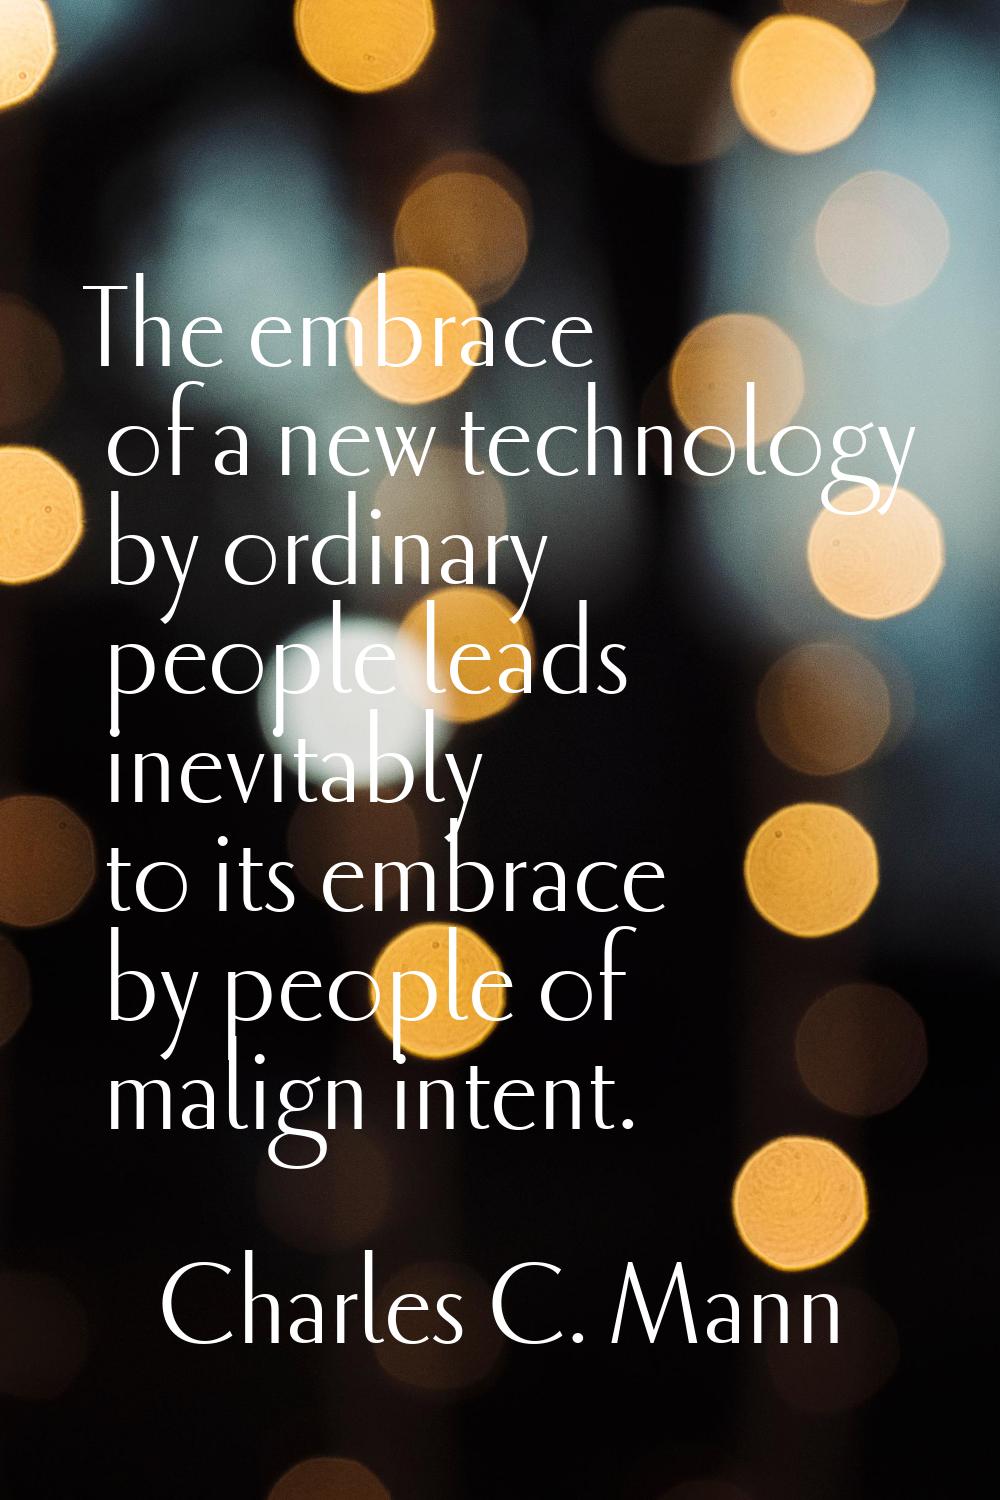 The embrace of a new technology by ordinary people leads inevitably to its embrace by people of mal